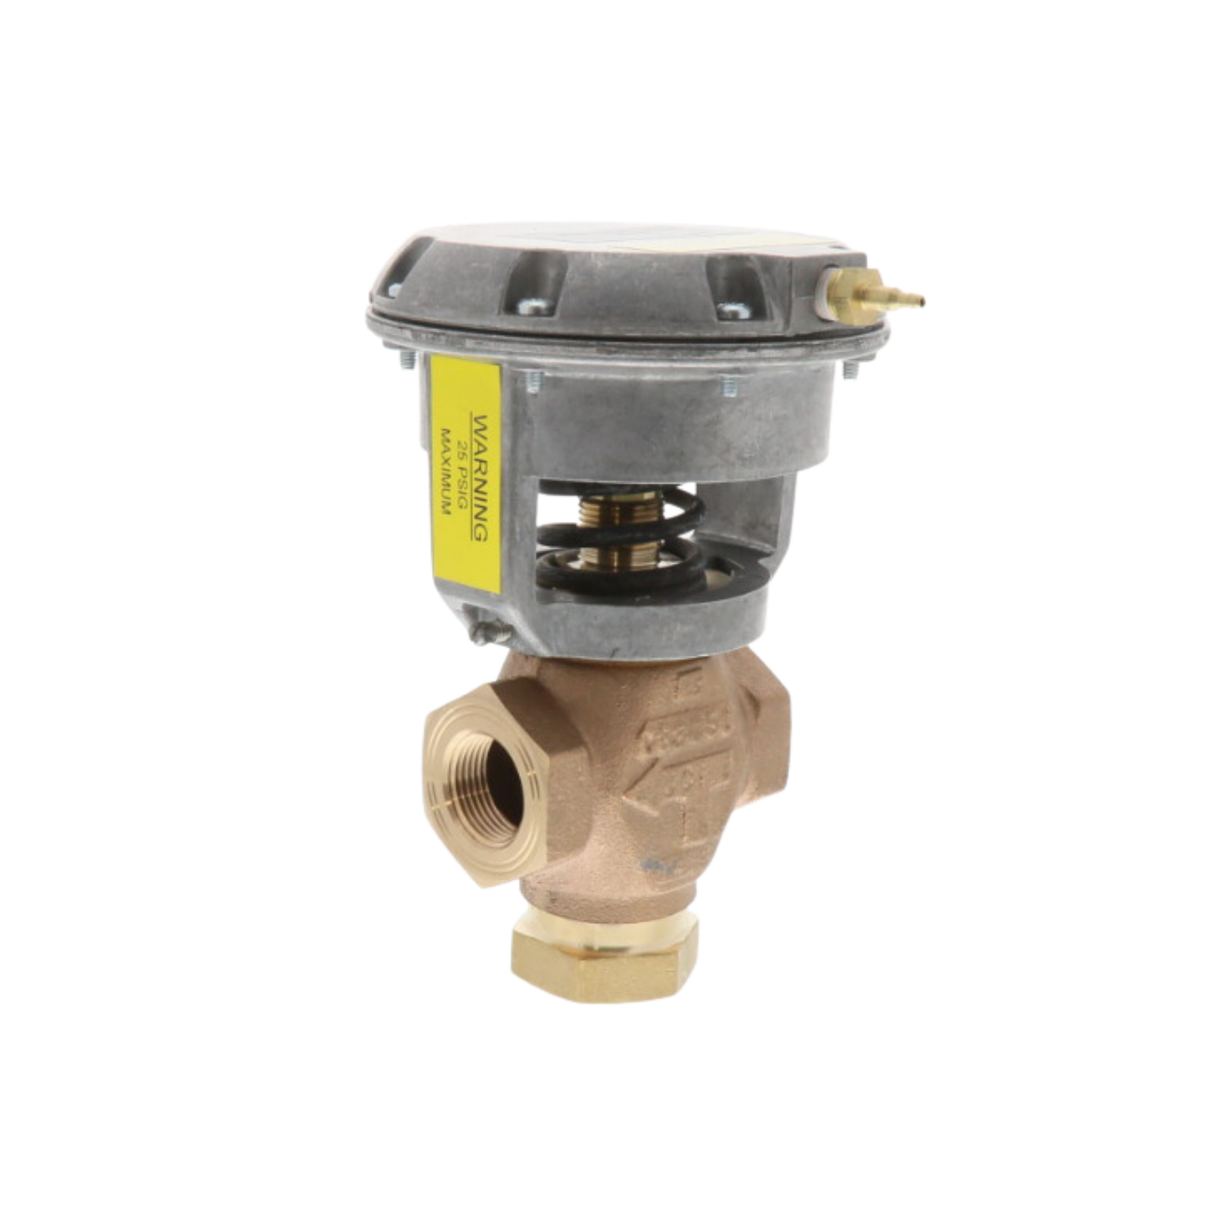 Johnson Controls VG7842LT+3008E 3/4" NPT Connection Size, 3 Way Mixing, Linear Flow, Valve with 9PSI - 13PSI Spring Range Spring Return Exposed Pneumatic Actuator